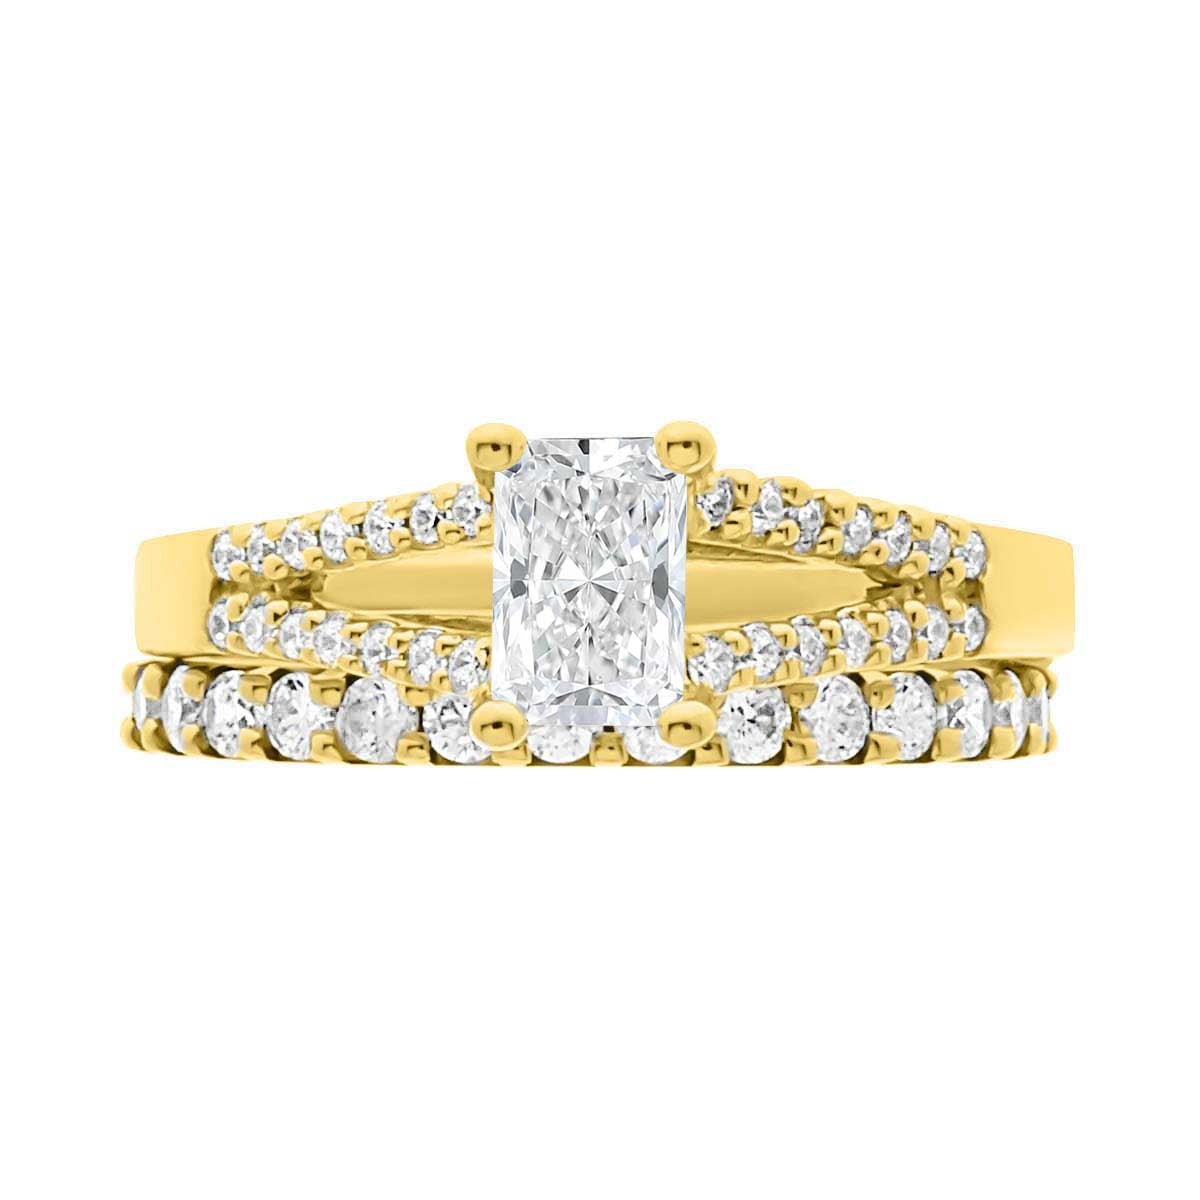 Radiant Cut Diamond Ring in yellow gold with a matching diamond set wedding ring